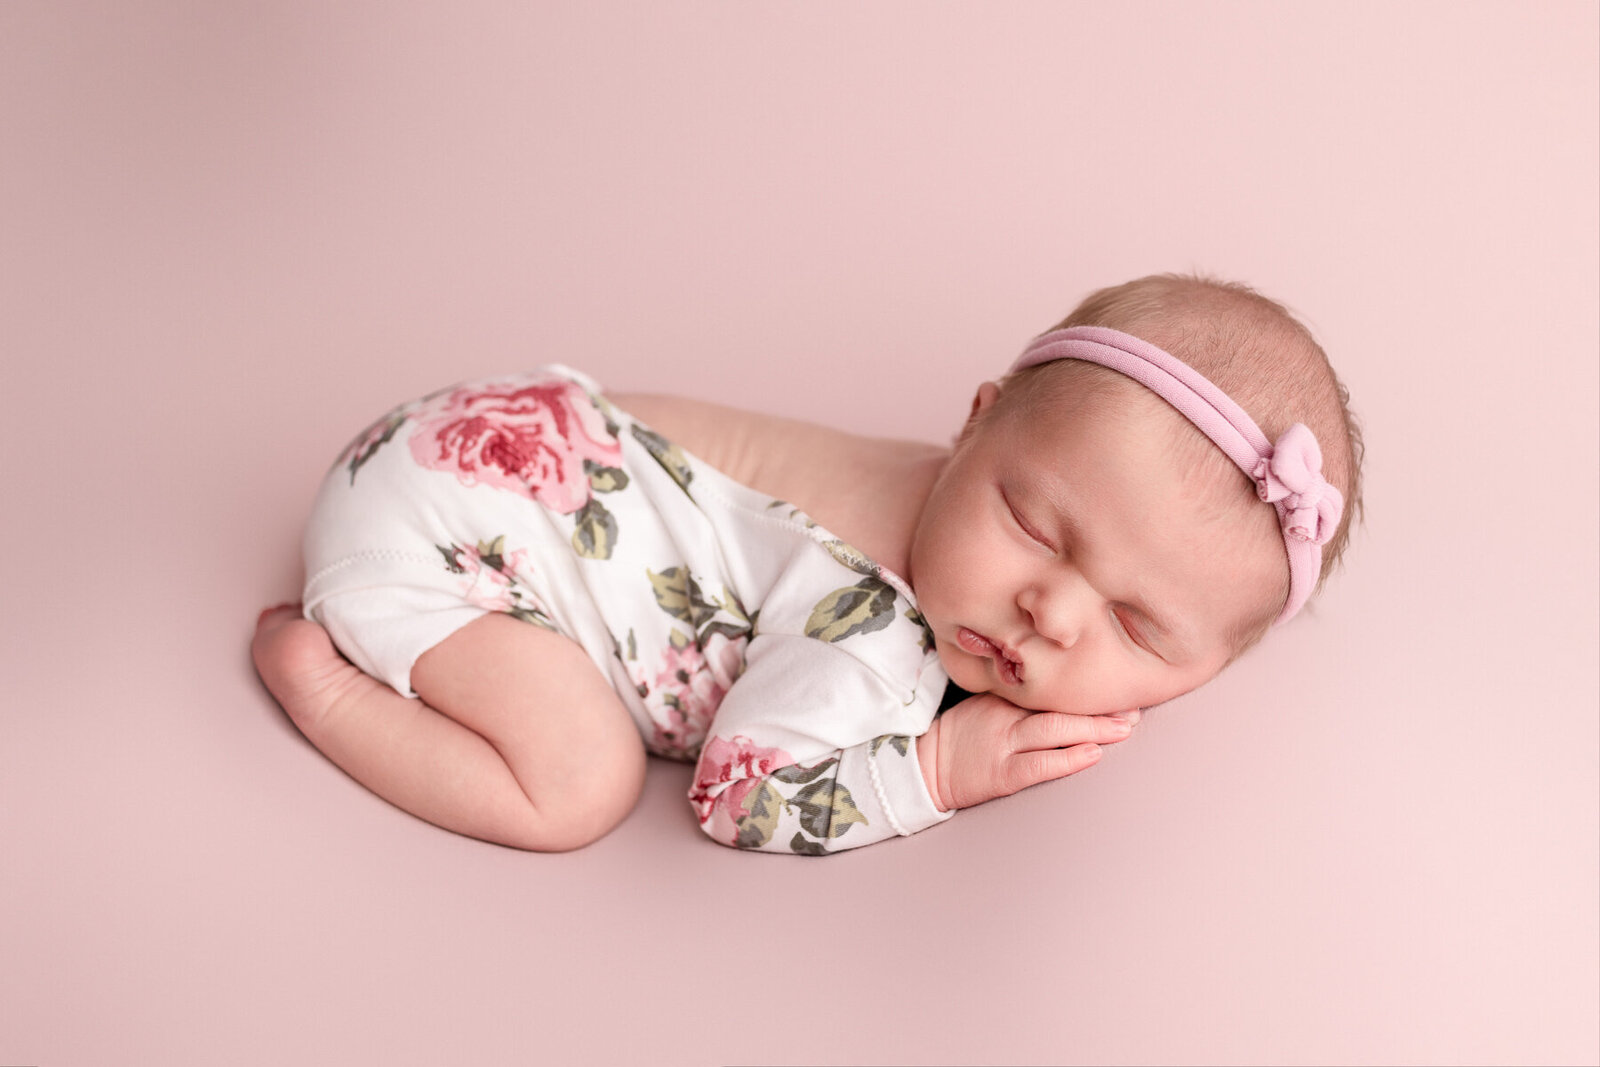 in-home-newborn-photography-session-lifestyle-photographer-Lexington-KY-photographer-baby-girl-2